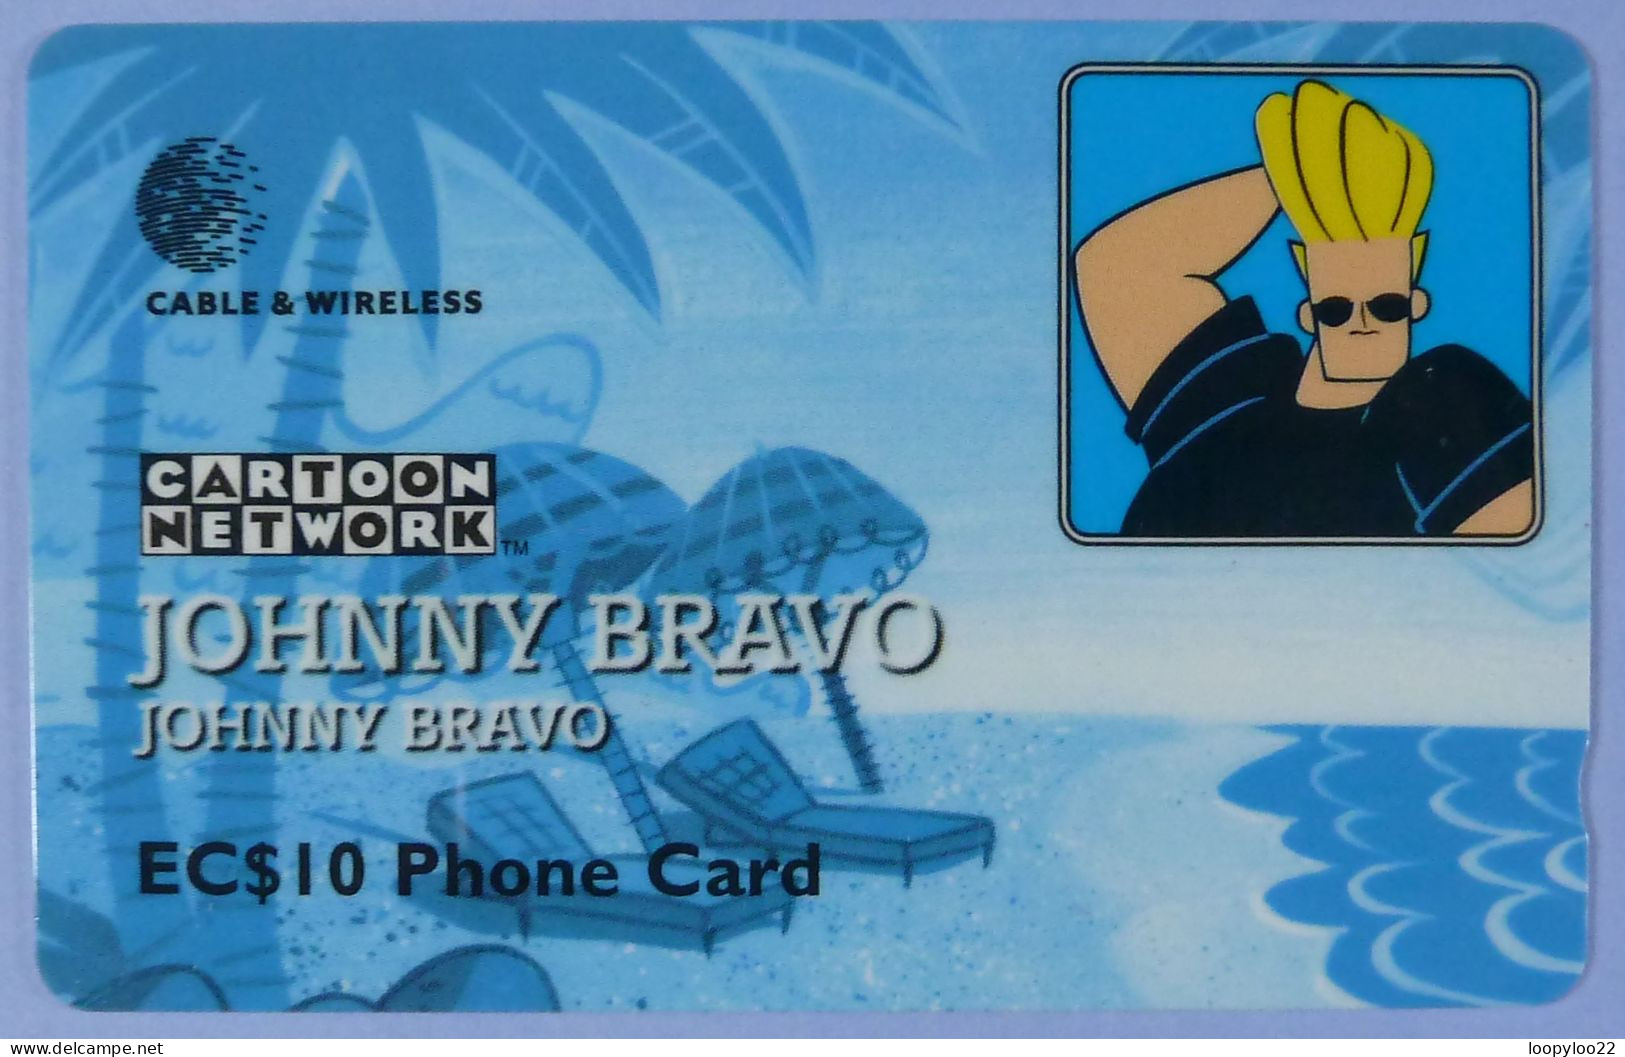 ST LUCIA - GPT - Cable & Wireless - Cartoon Network - Johnny Bravo - Specimen - $10 - Limited Edition - St. Lucia